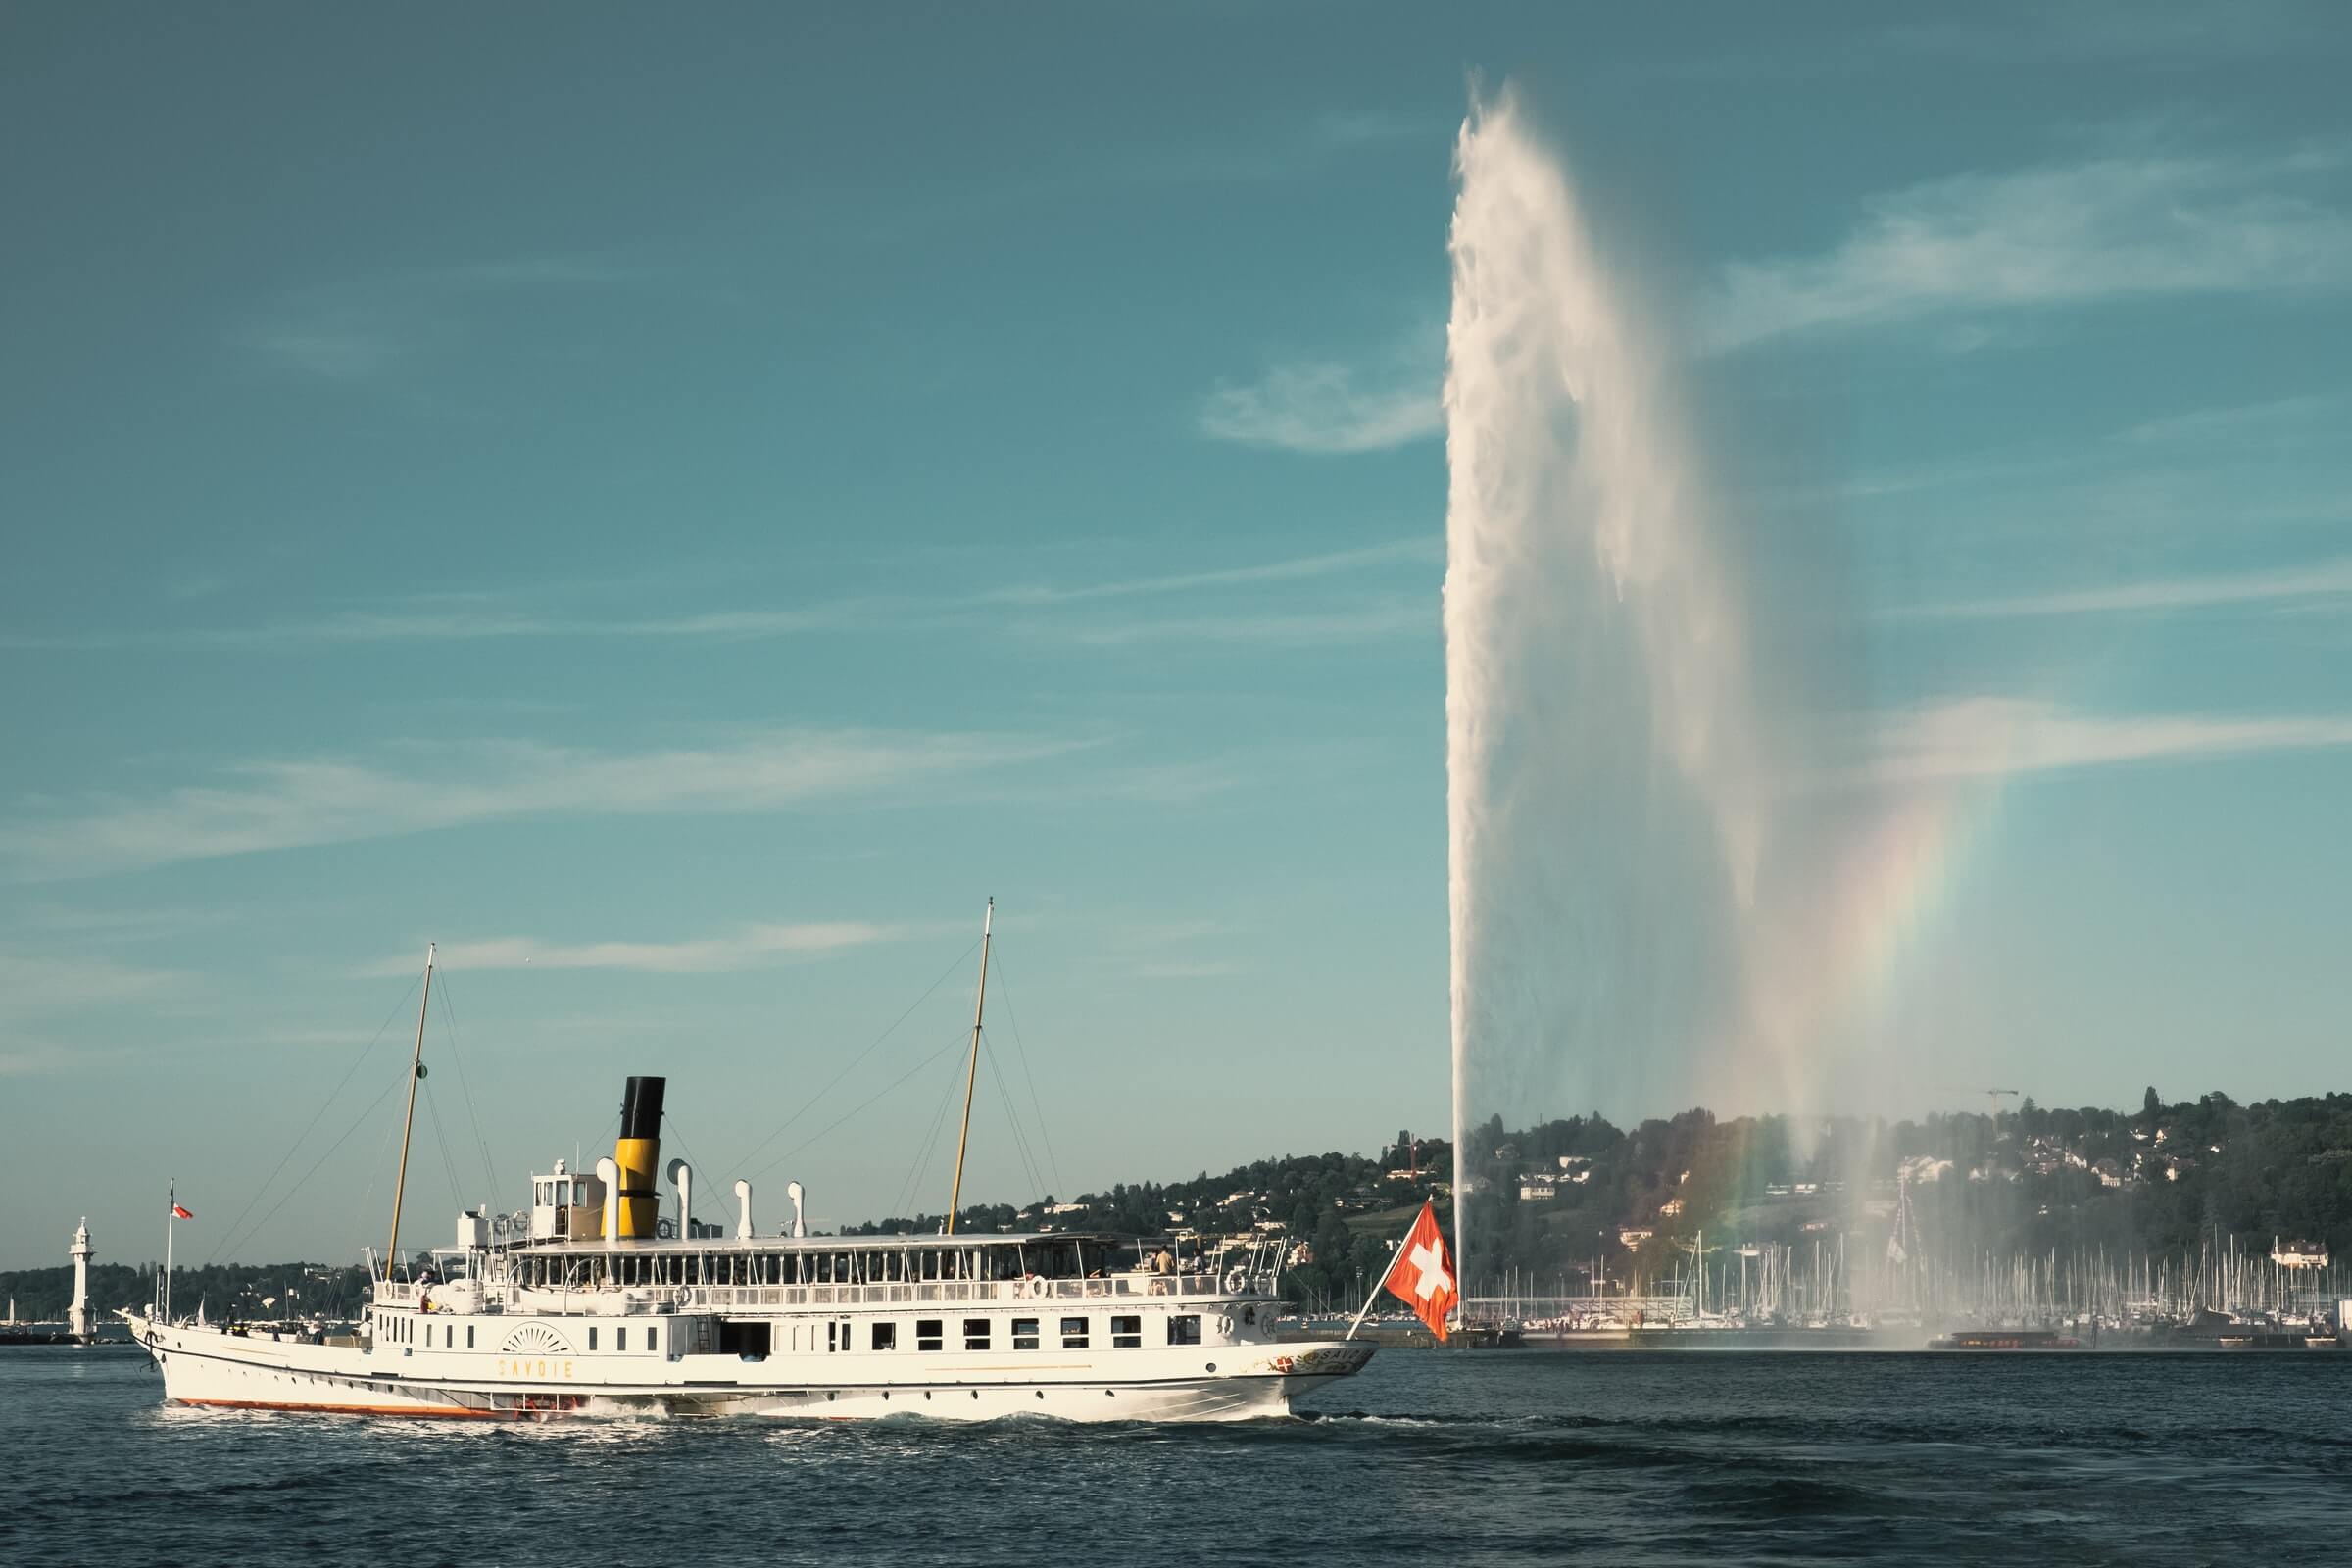 Boat flying the Swiss flag on Lac Leman, Geneva, Switzerland with the Jet d'Eau and a rainbow in the background.